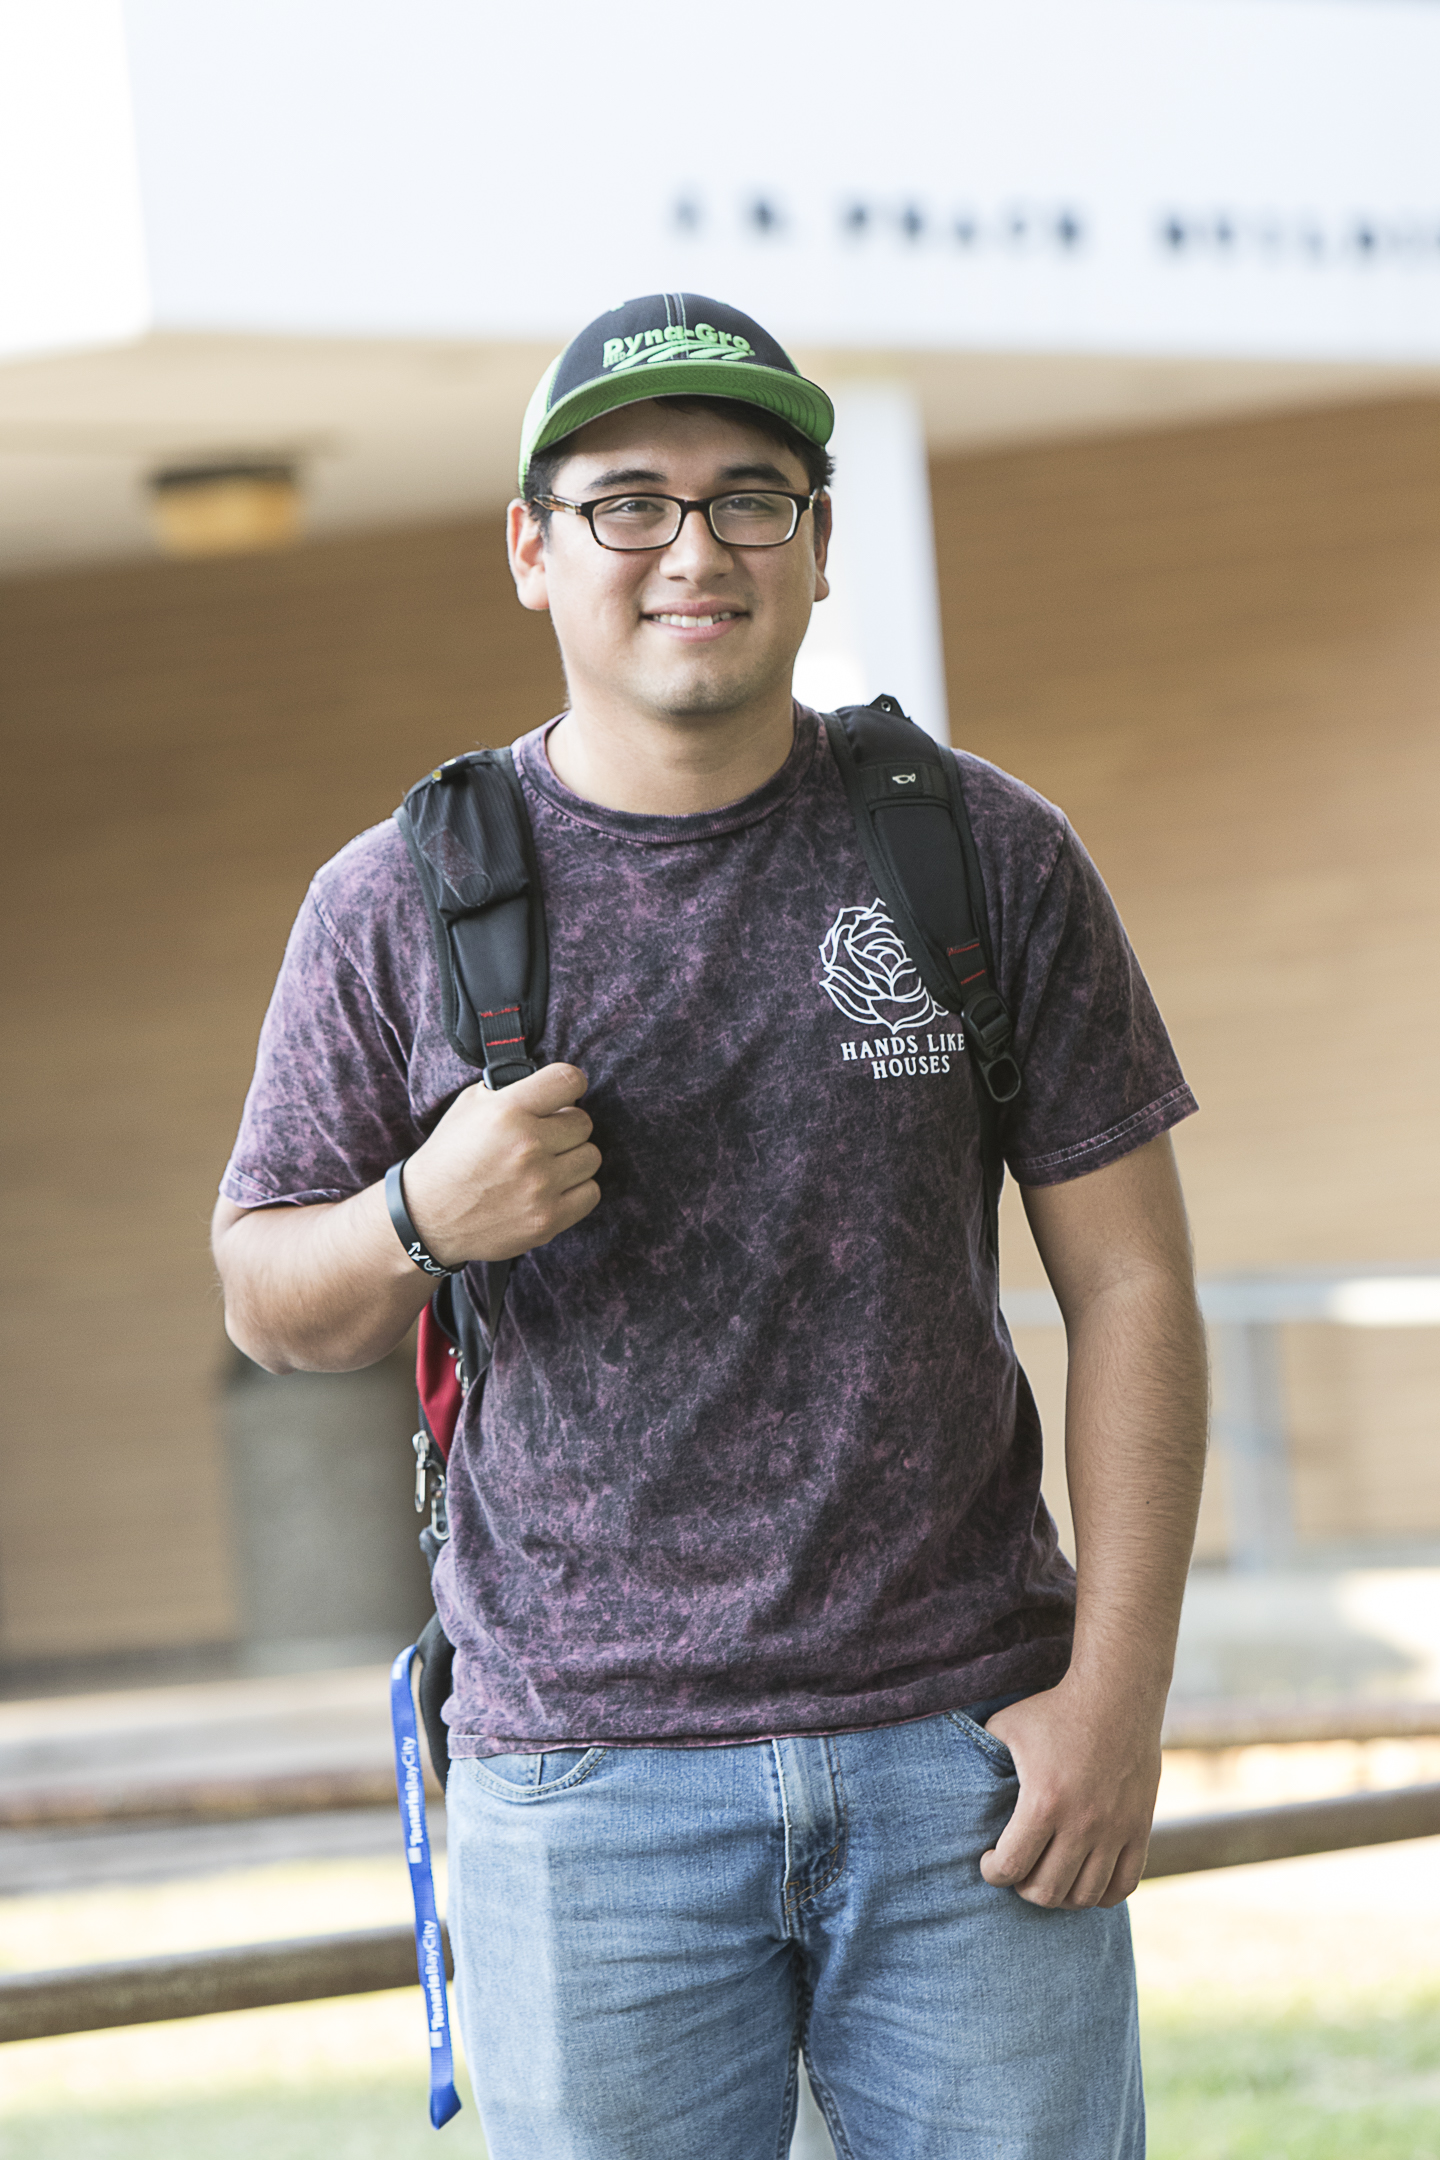 El Campo resident Ismael Mendez will continue his studies at Wharton County Junior College thanks to a $5,000 scholarship from the Houston Livestock Show & Rodeo. Mendez is enrolled in the Engineering Design Program.